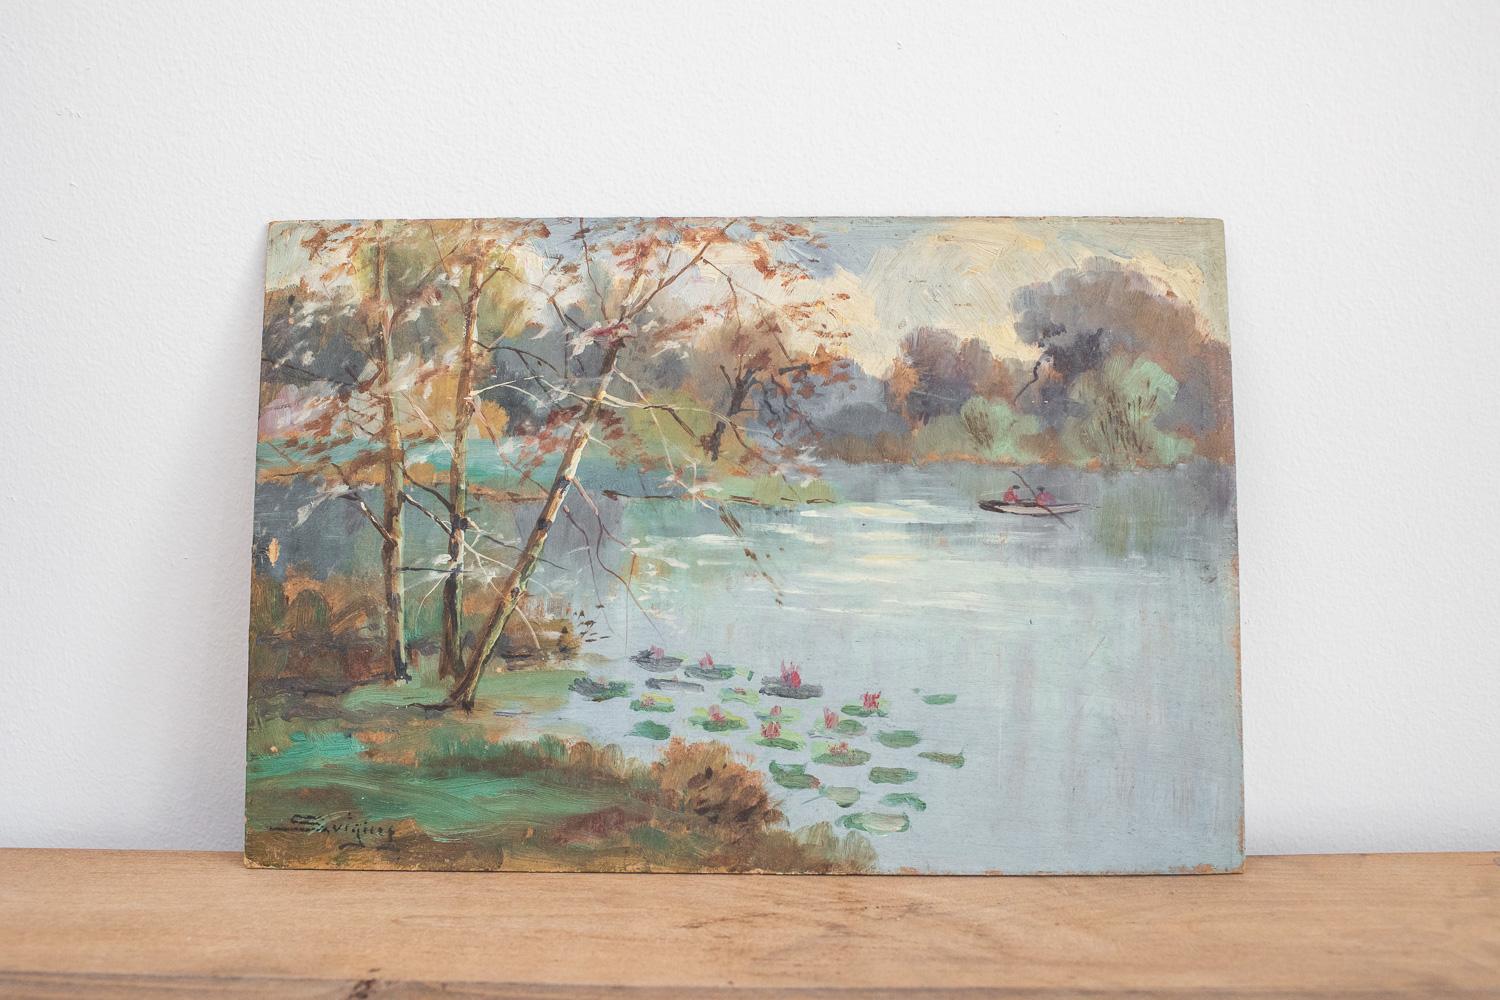 This lovely oil painting features very soft blue and green colors from a landscape scene in Savigny, France. In the painting, there are 2 people in a canoe.